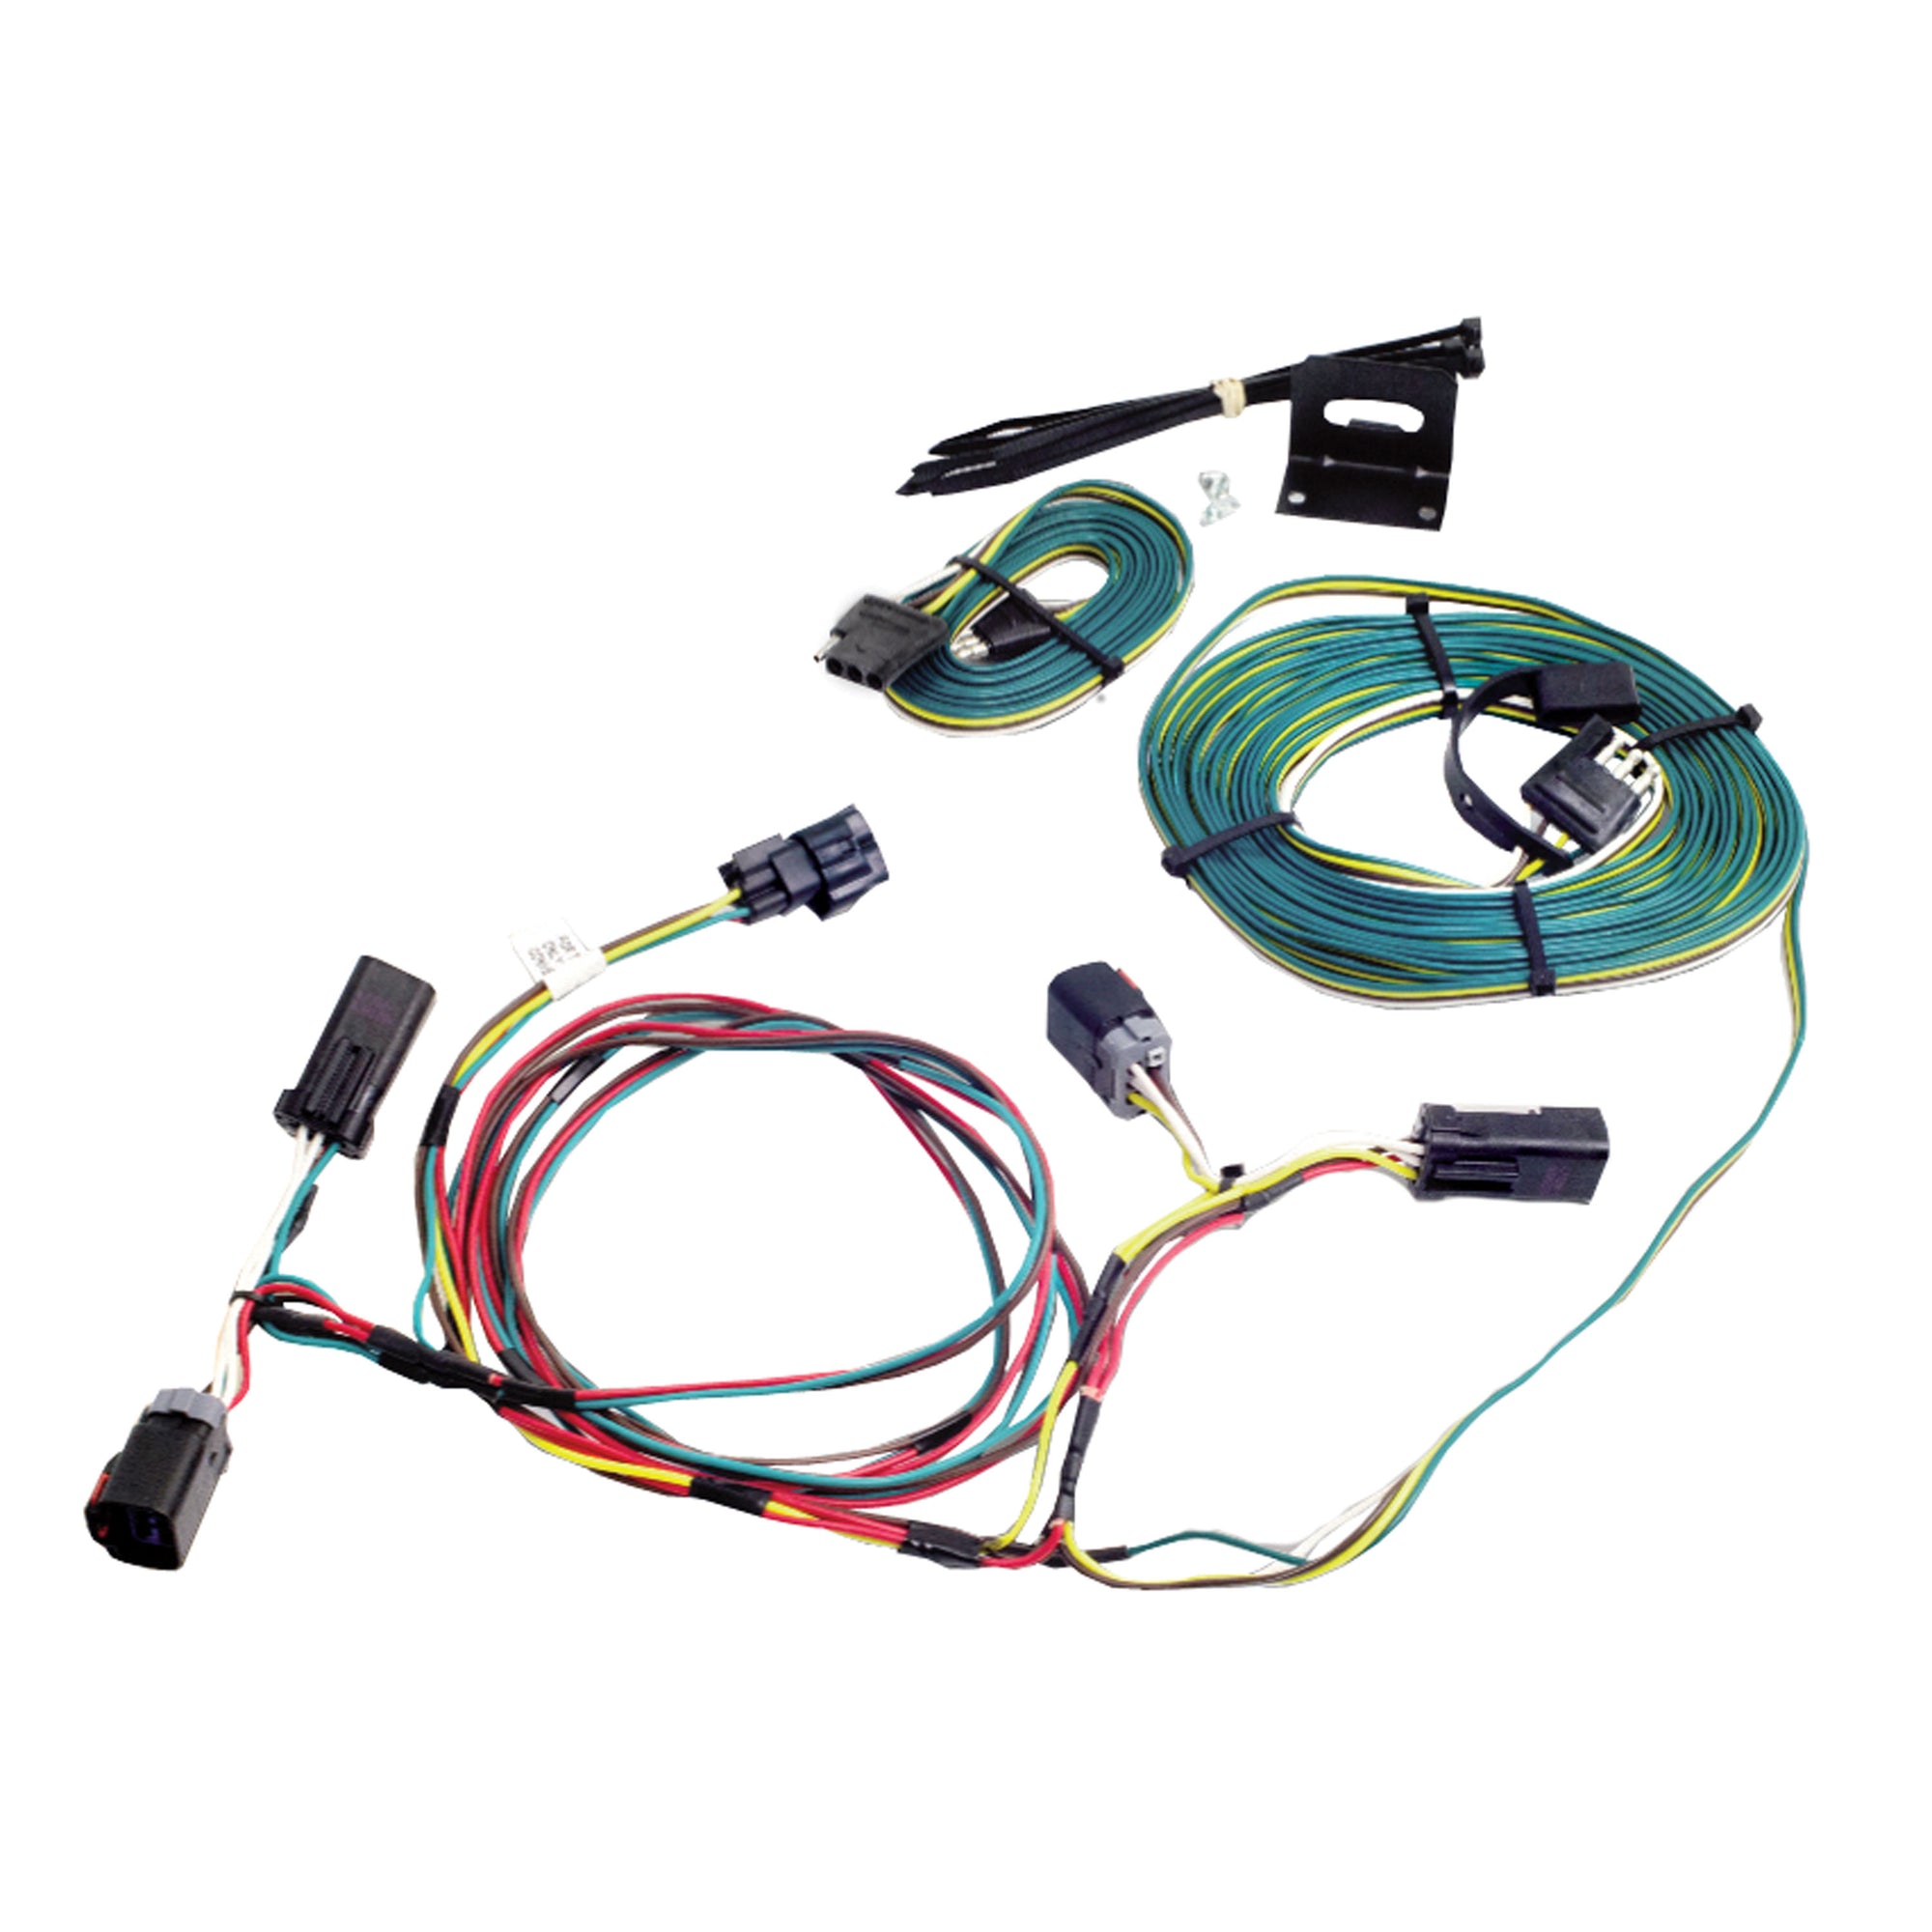 Demco 9523094 Towed Connector Vehicle Wiring Kit - For Saturn Aura '07-'09